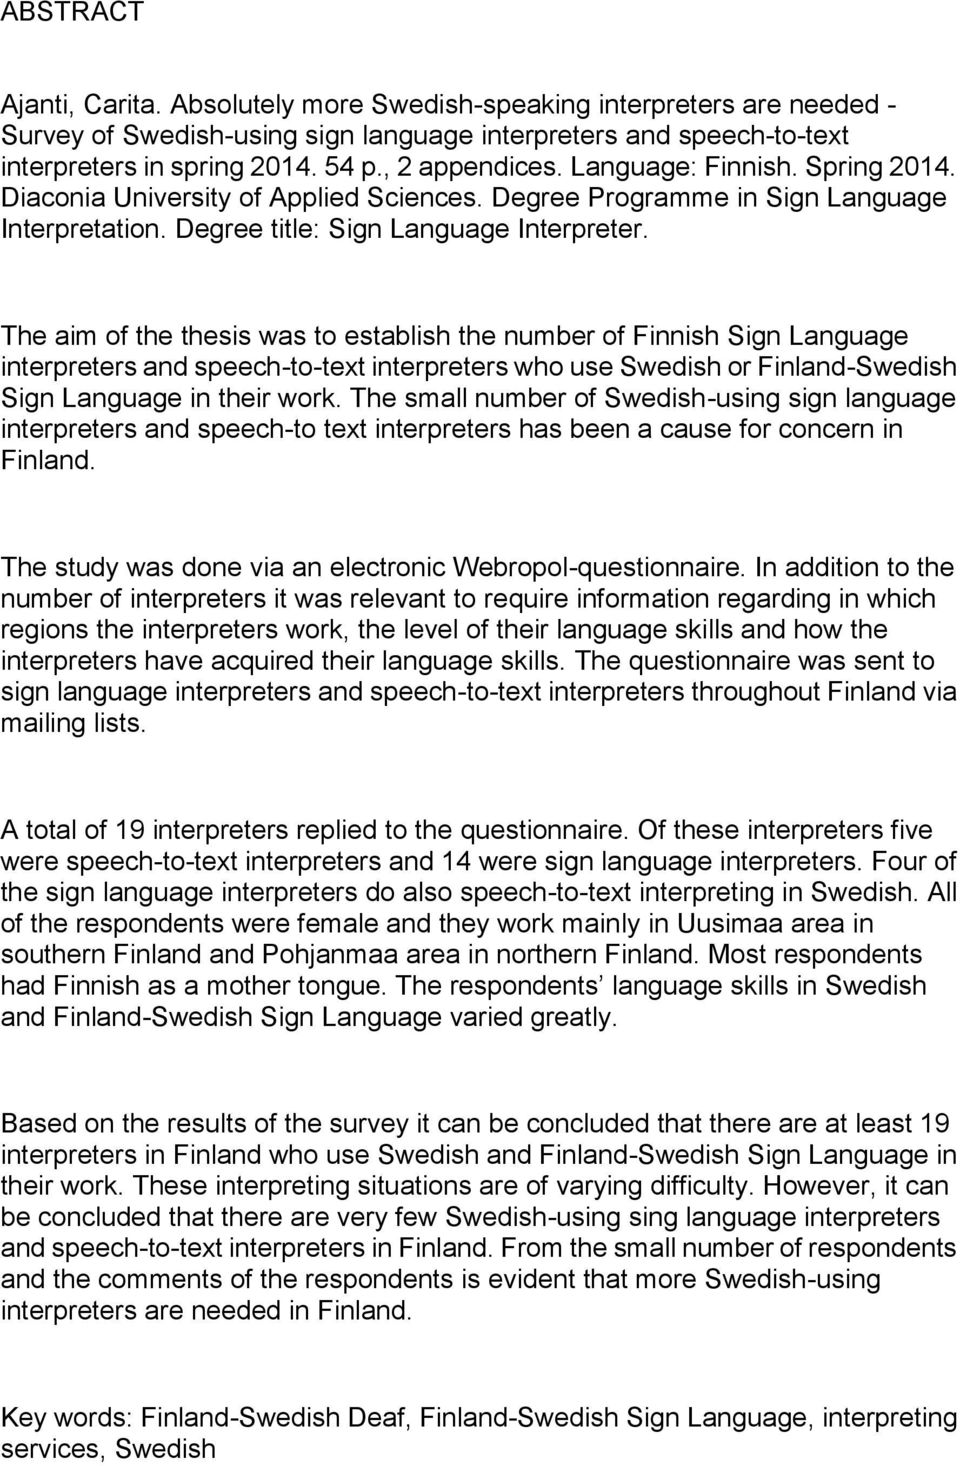 The aim of the thesis was to establish the number of Finnish Sign Language interpreters and speech-to-text interpreters who use Swedish or Finland-Swedish Sign Language in their work.